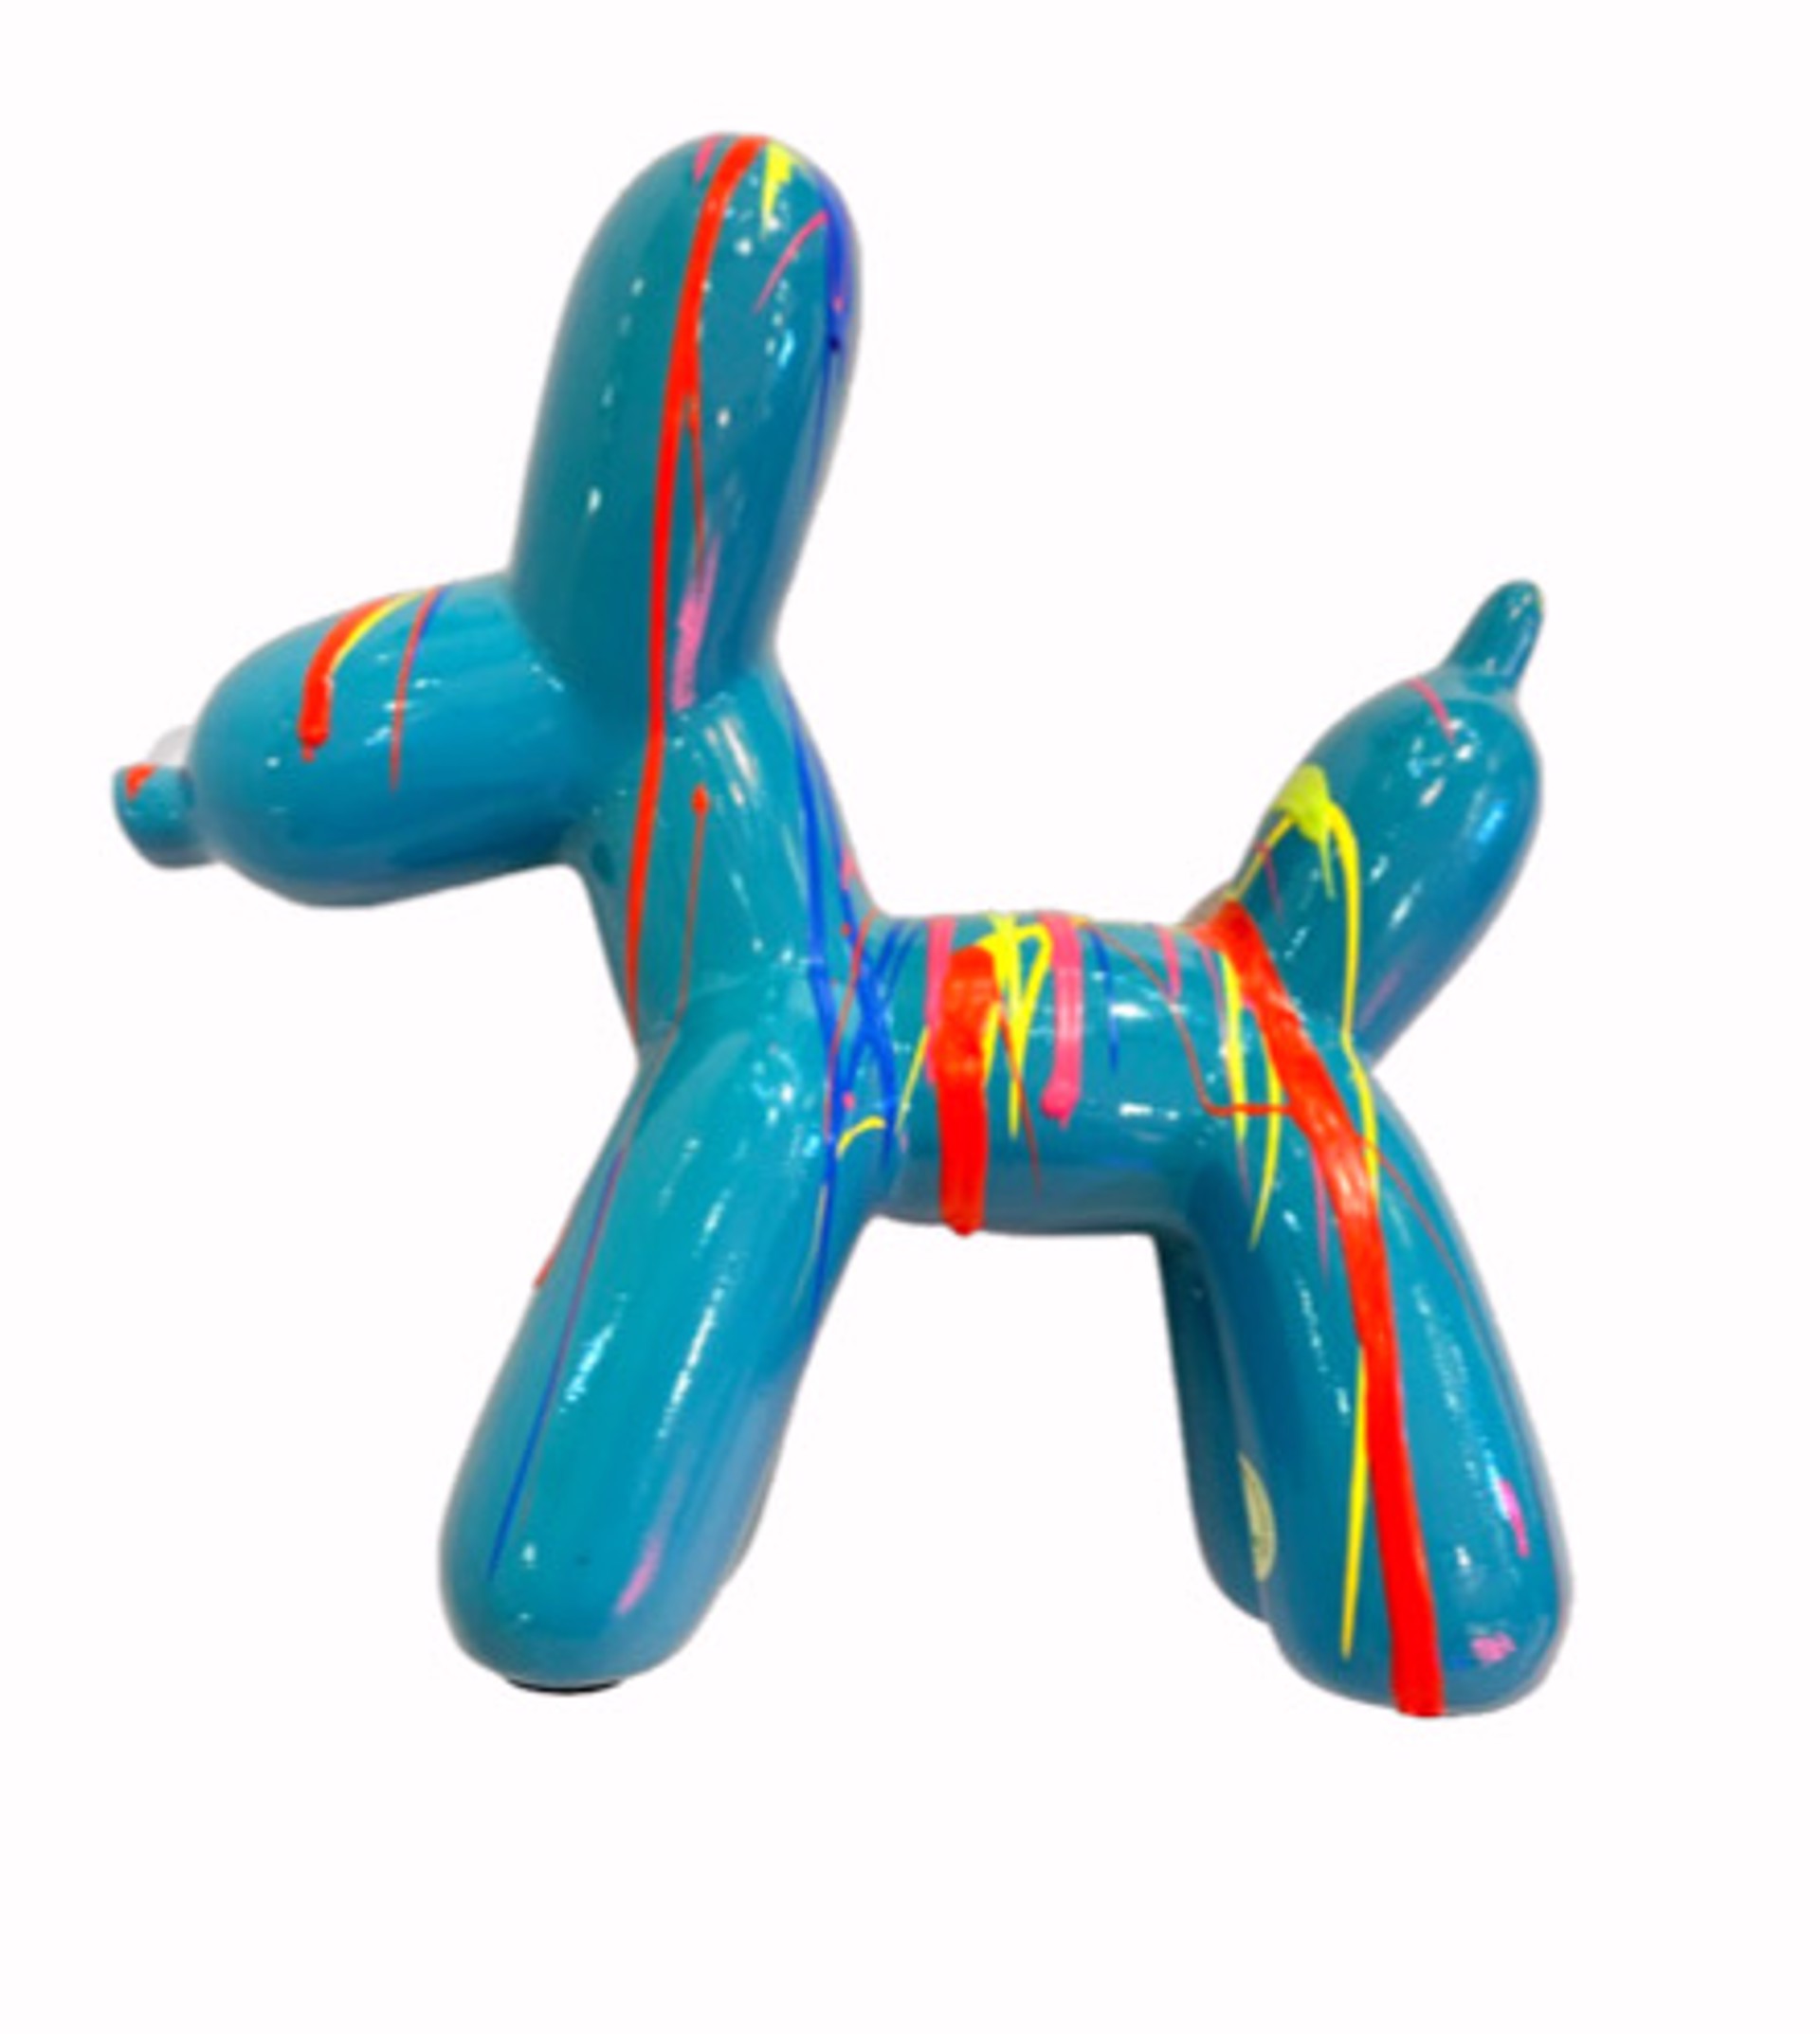  “Toy Collection "Balloon Dog”